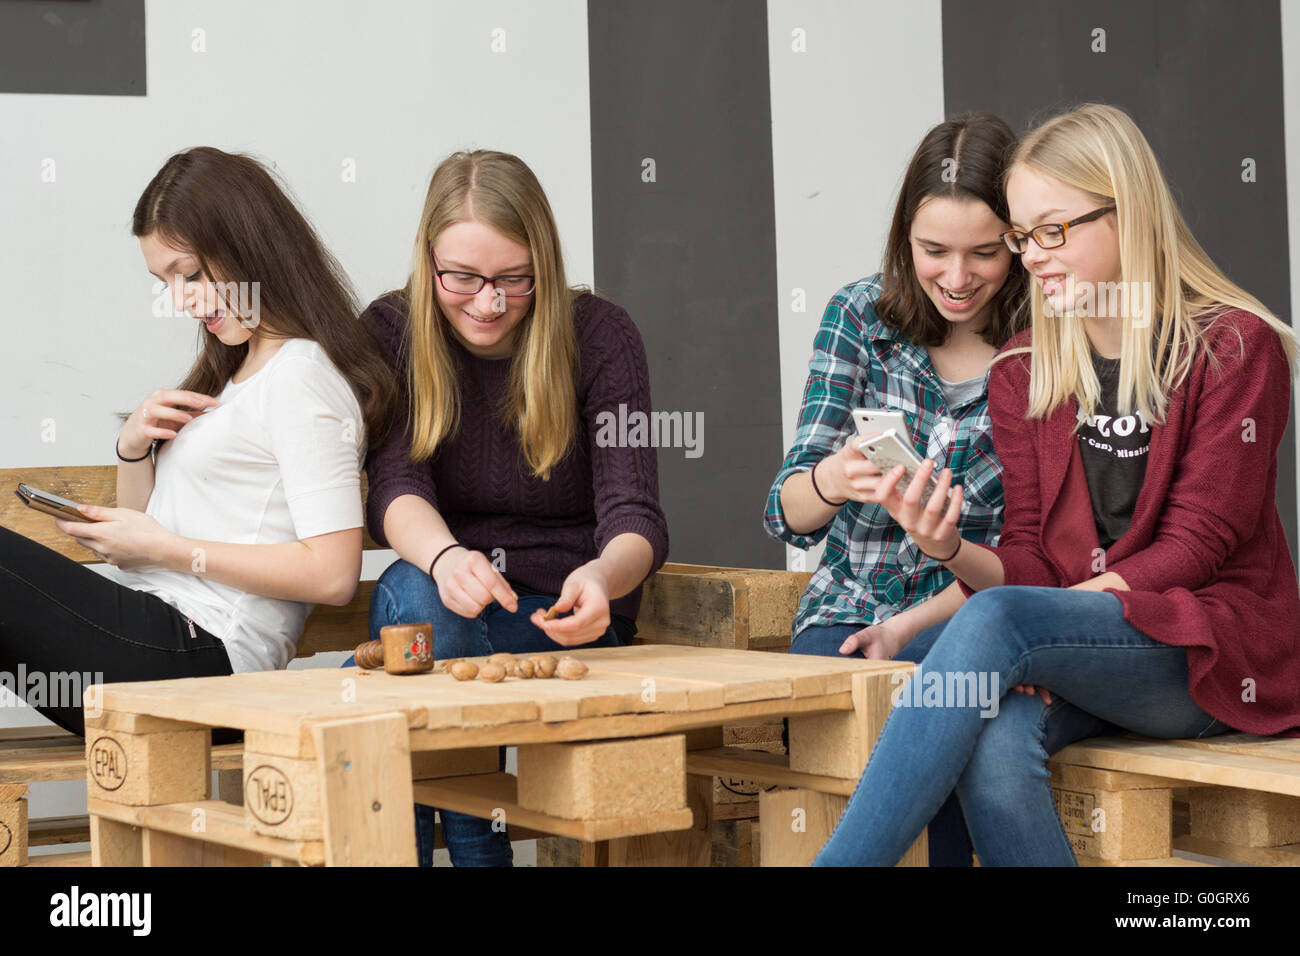 funny teen group with their smartphones Stock Photo